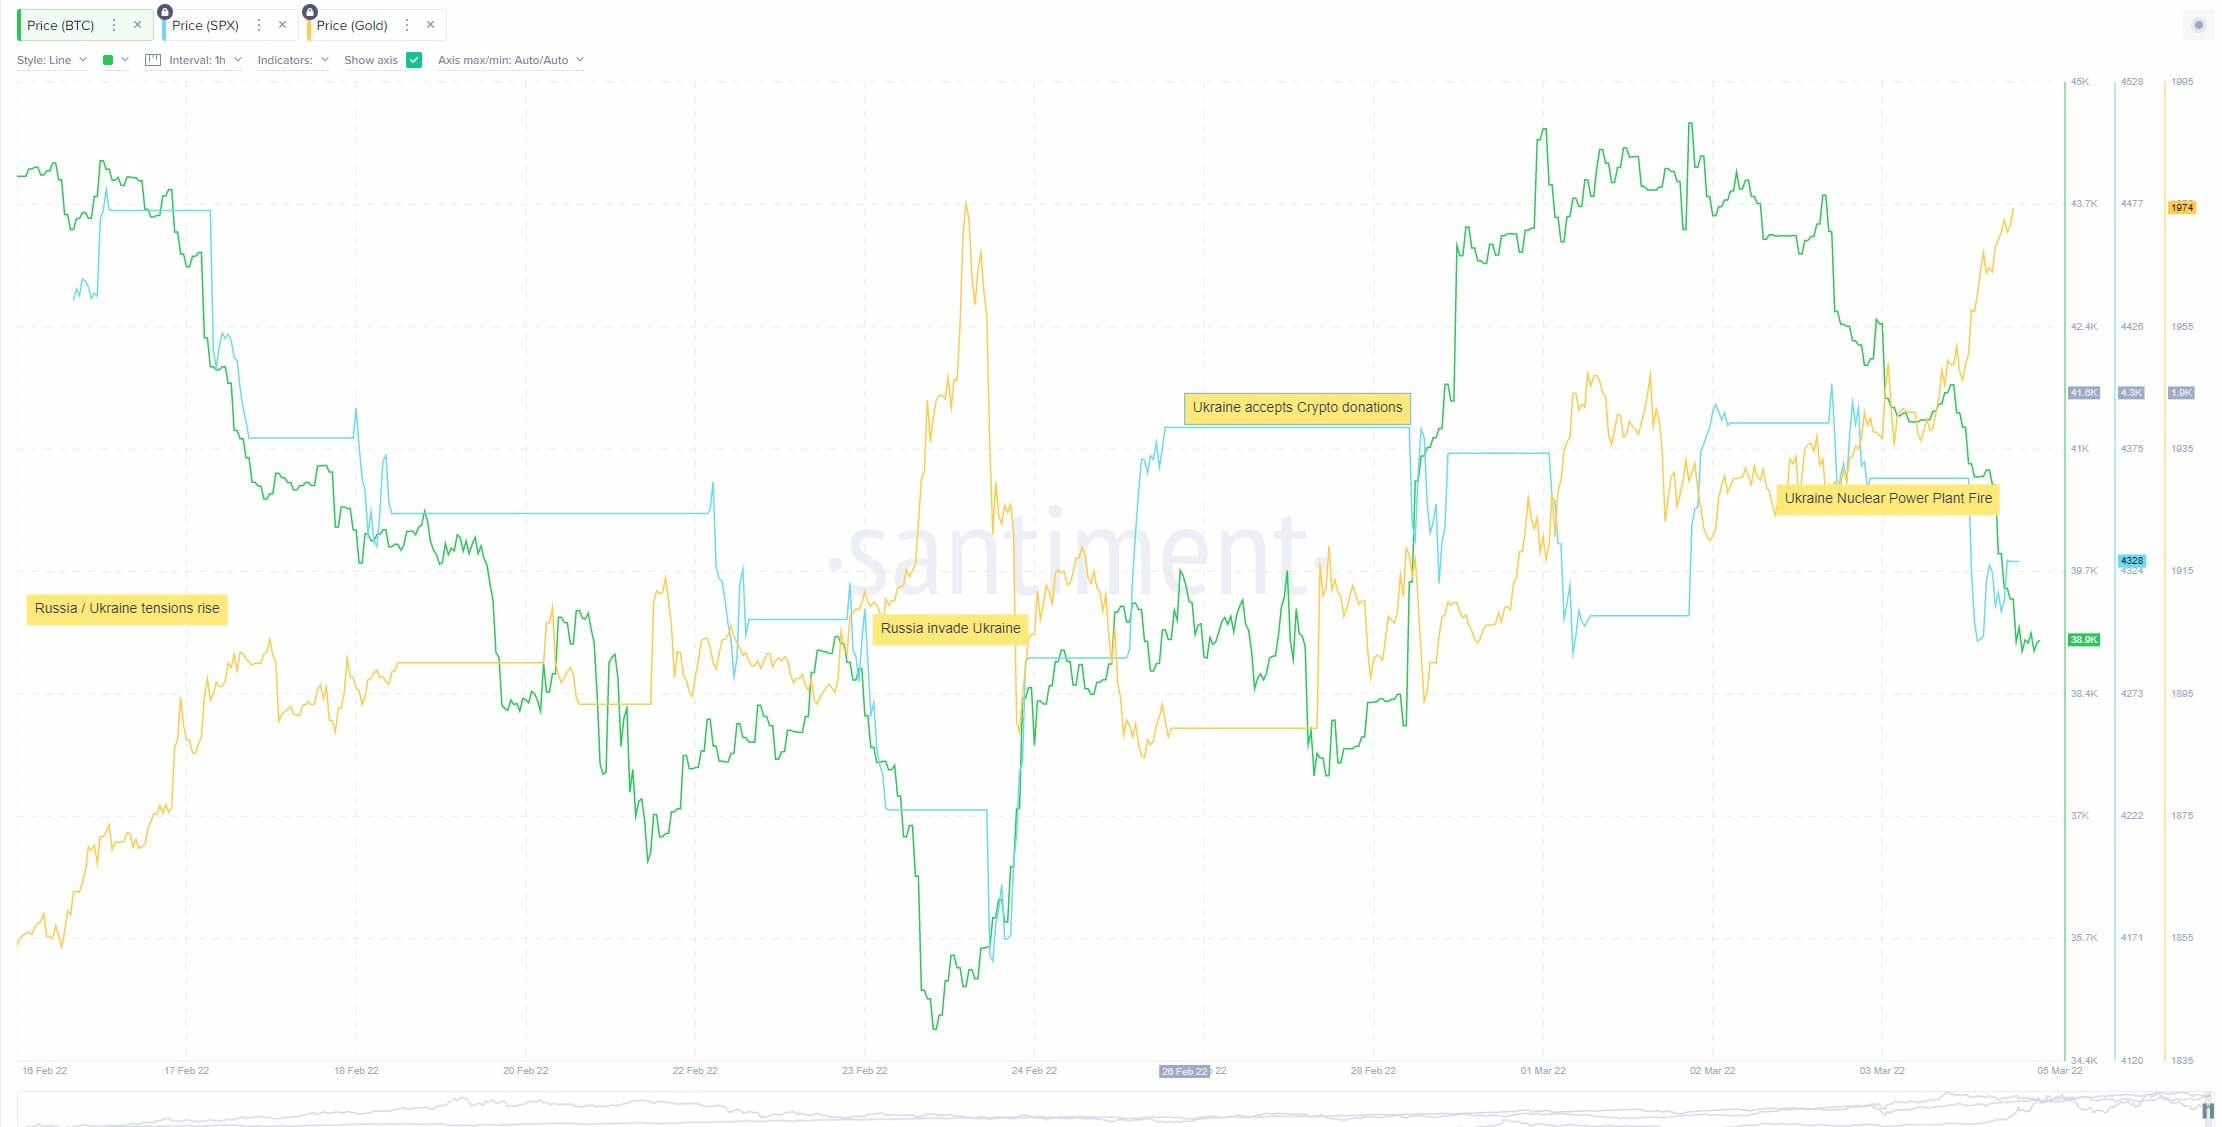 Gold outperforms Bitcoin as a store of value as BTC